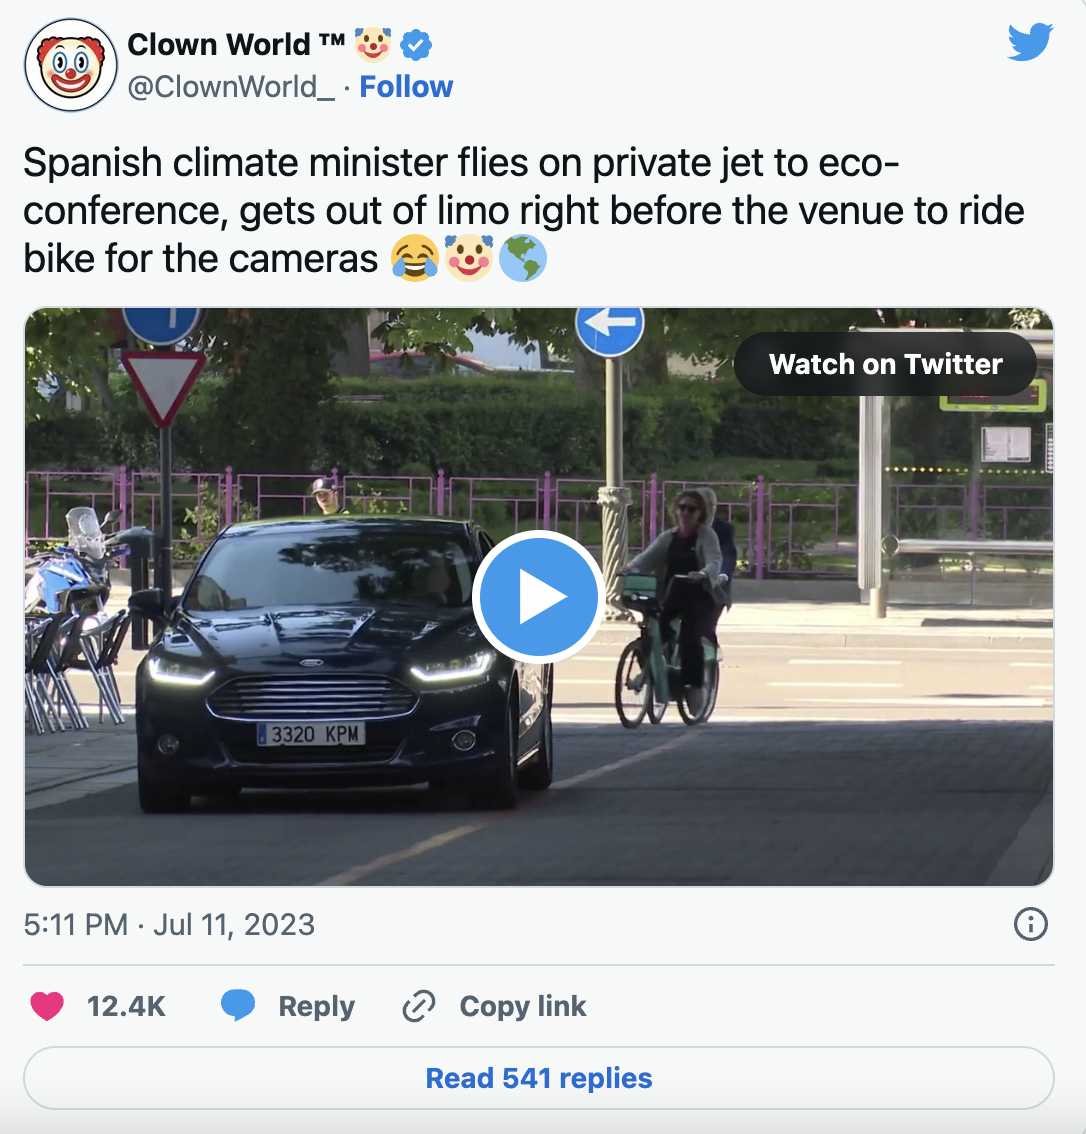 display advertising - Clown World Tm Spanish climate minister flies on private jet to eco conference, gets out of limo right before the venue to ride bike for the cameras 3320 Kpm D Copy link Read 541 replies Watch on Twitter